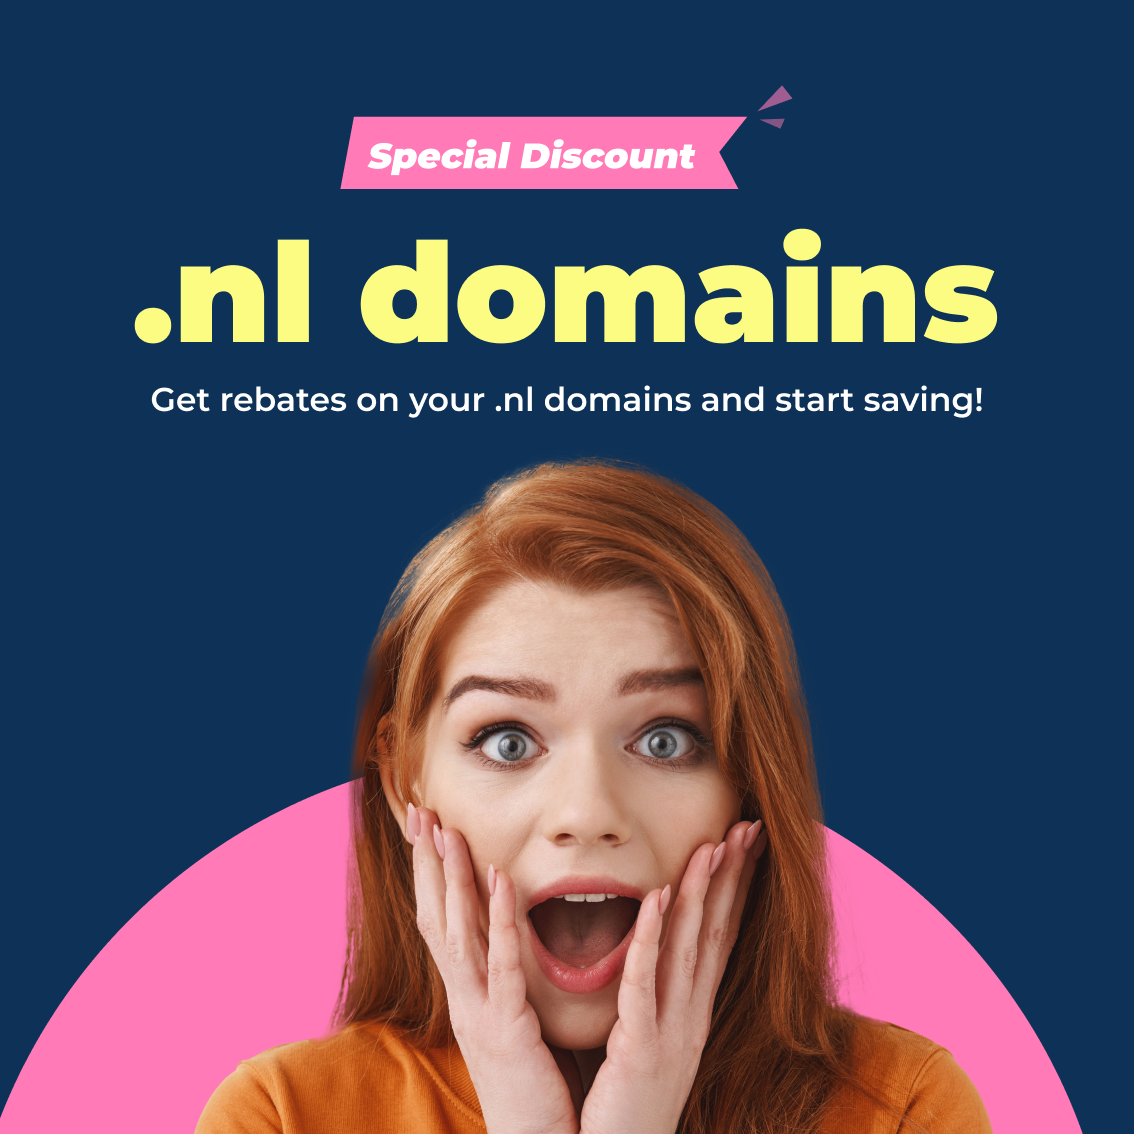 nl-domain-discount-get-up-to-8-in-rebates-openprovider